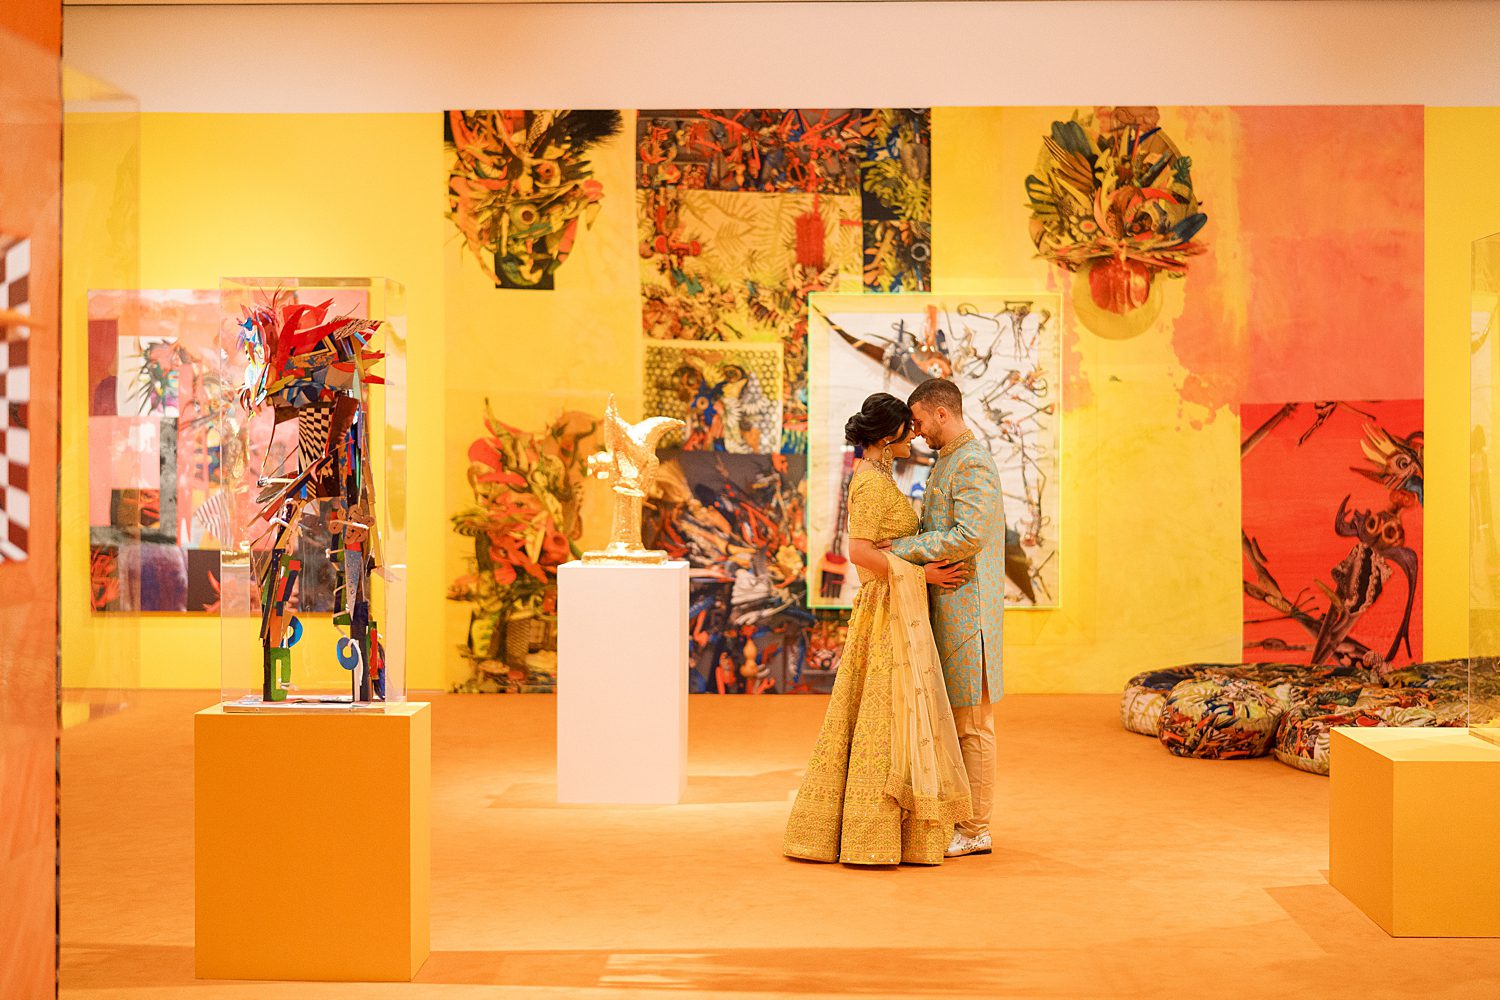 husband and wife hug in colorful artwork gallery at the Tampa Museum of Art